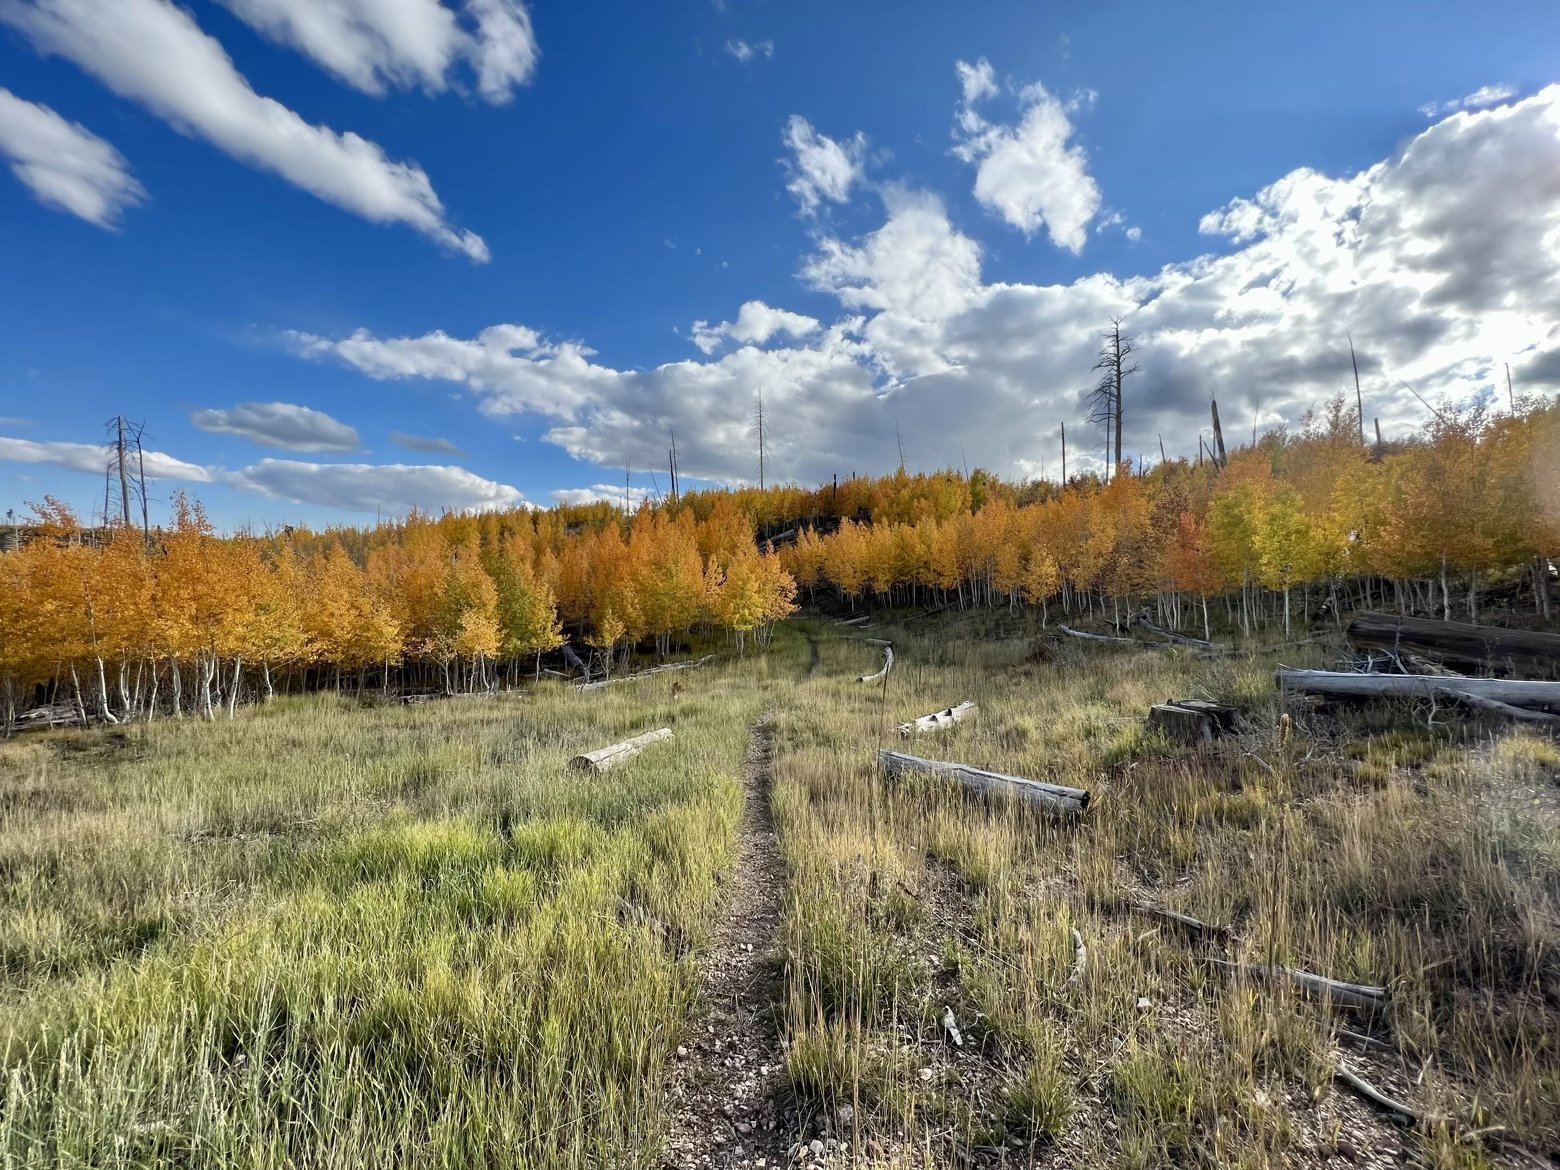 Winding among young aspens, bright with fall color